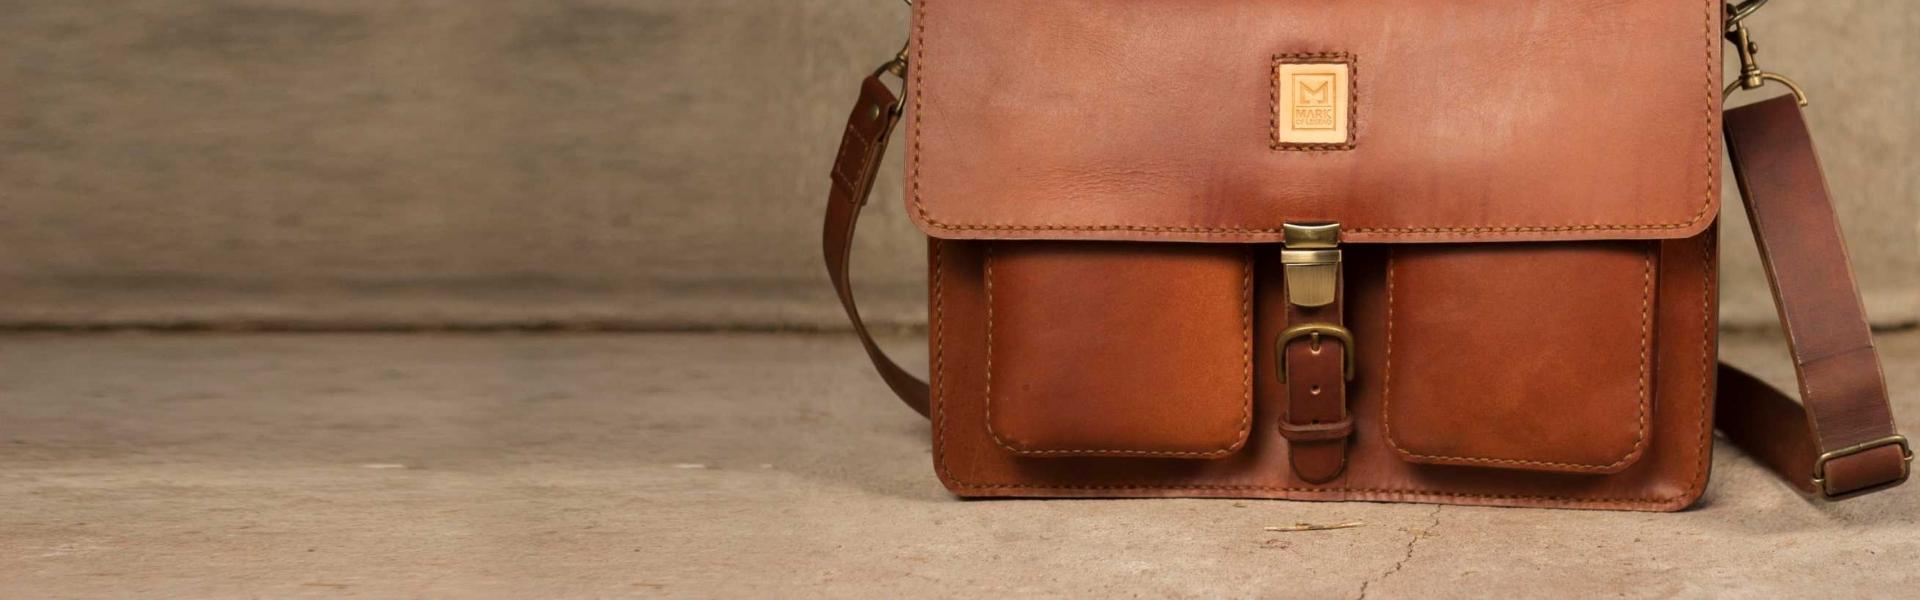 For Love and Leather - Handmade South African Leather products.